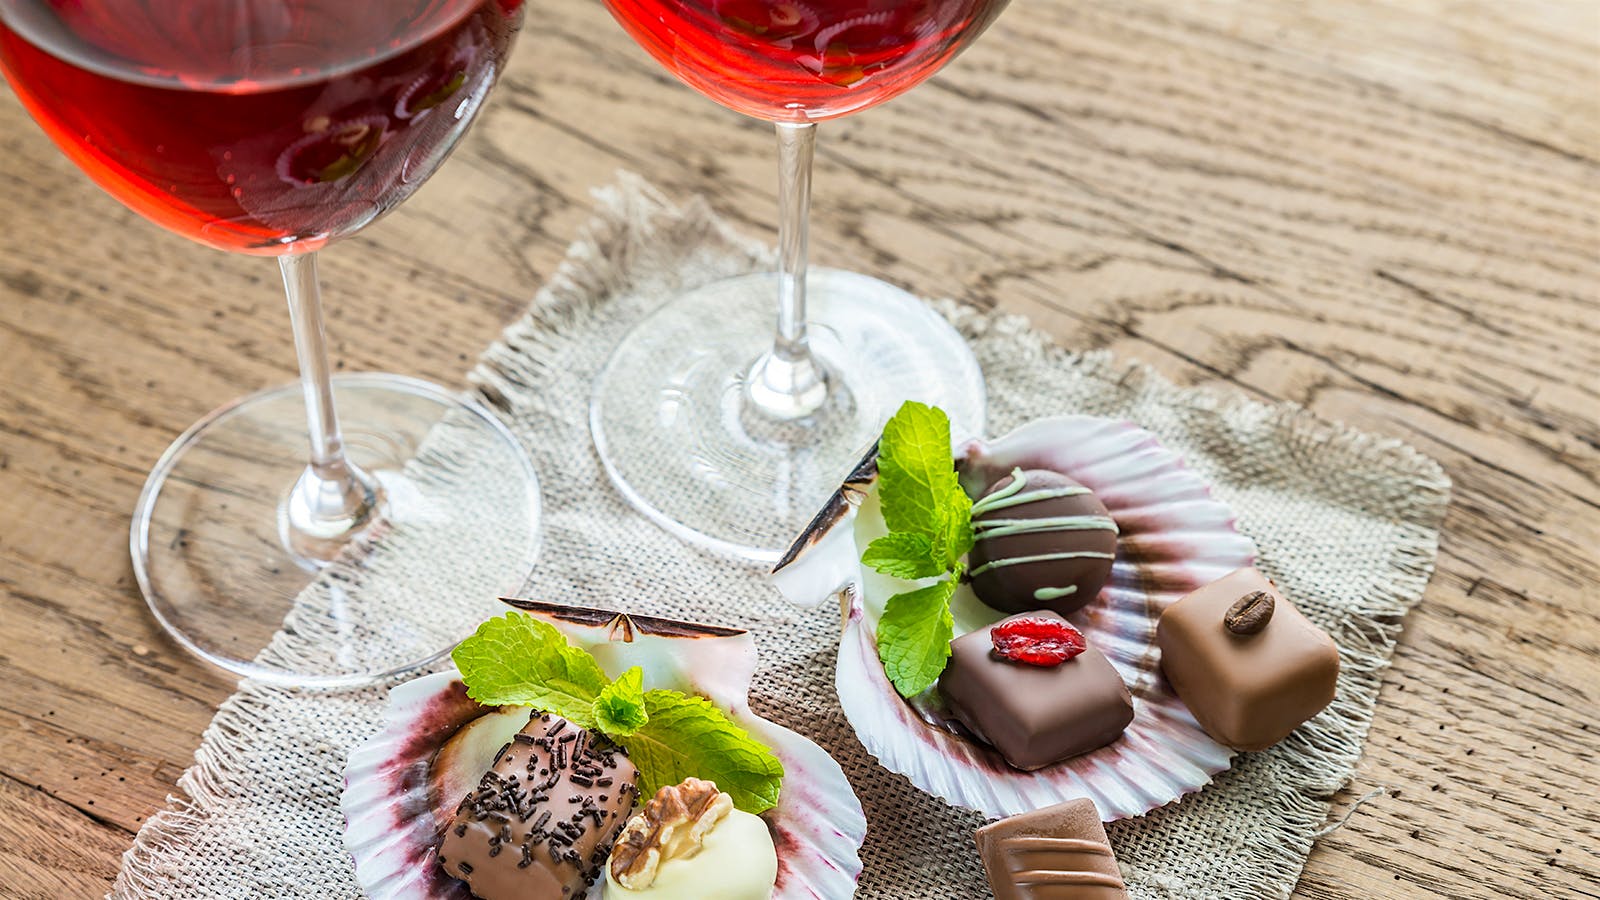 Sommelier Roundtable: Your Favorite Wine-and-Candy Pairing